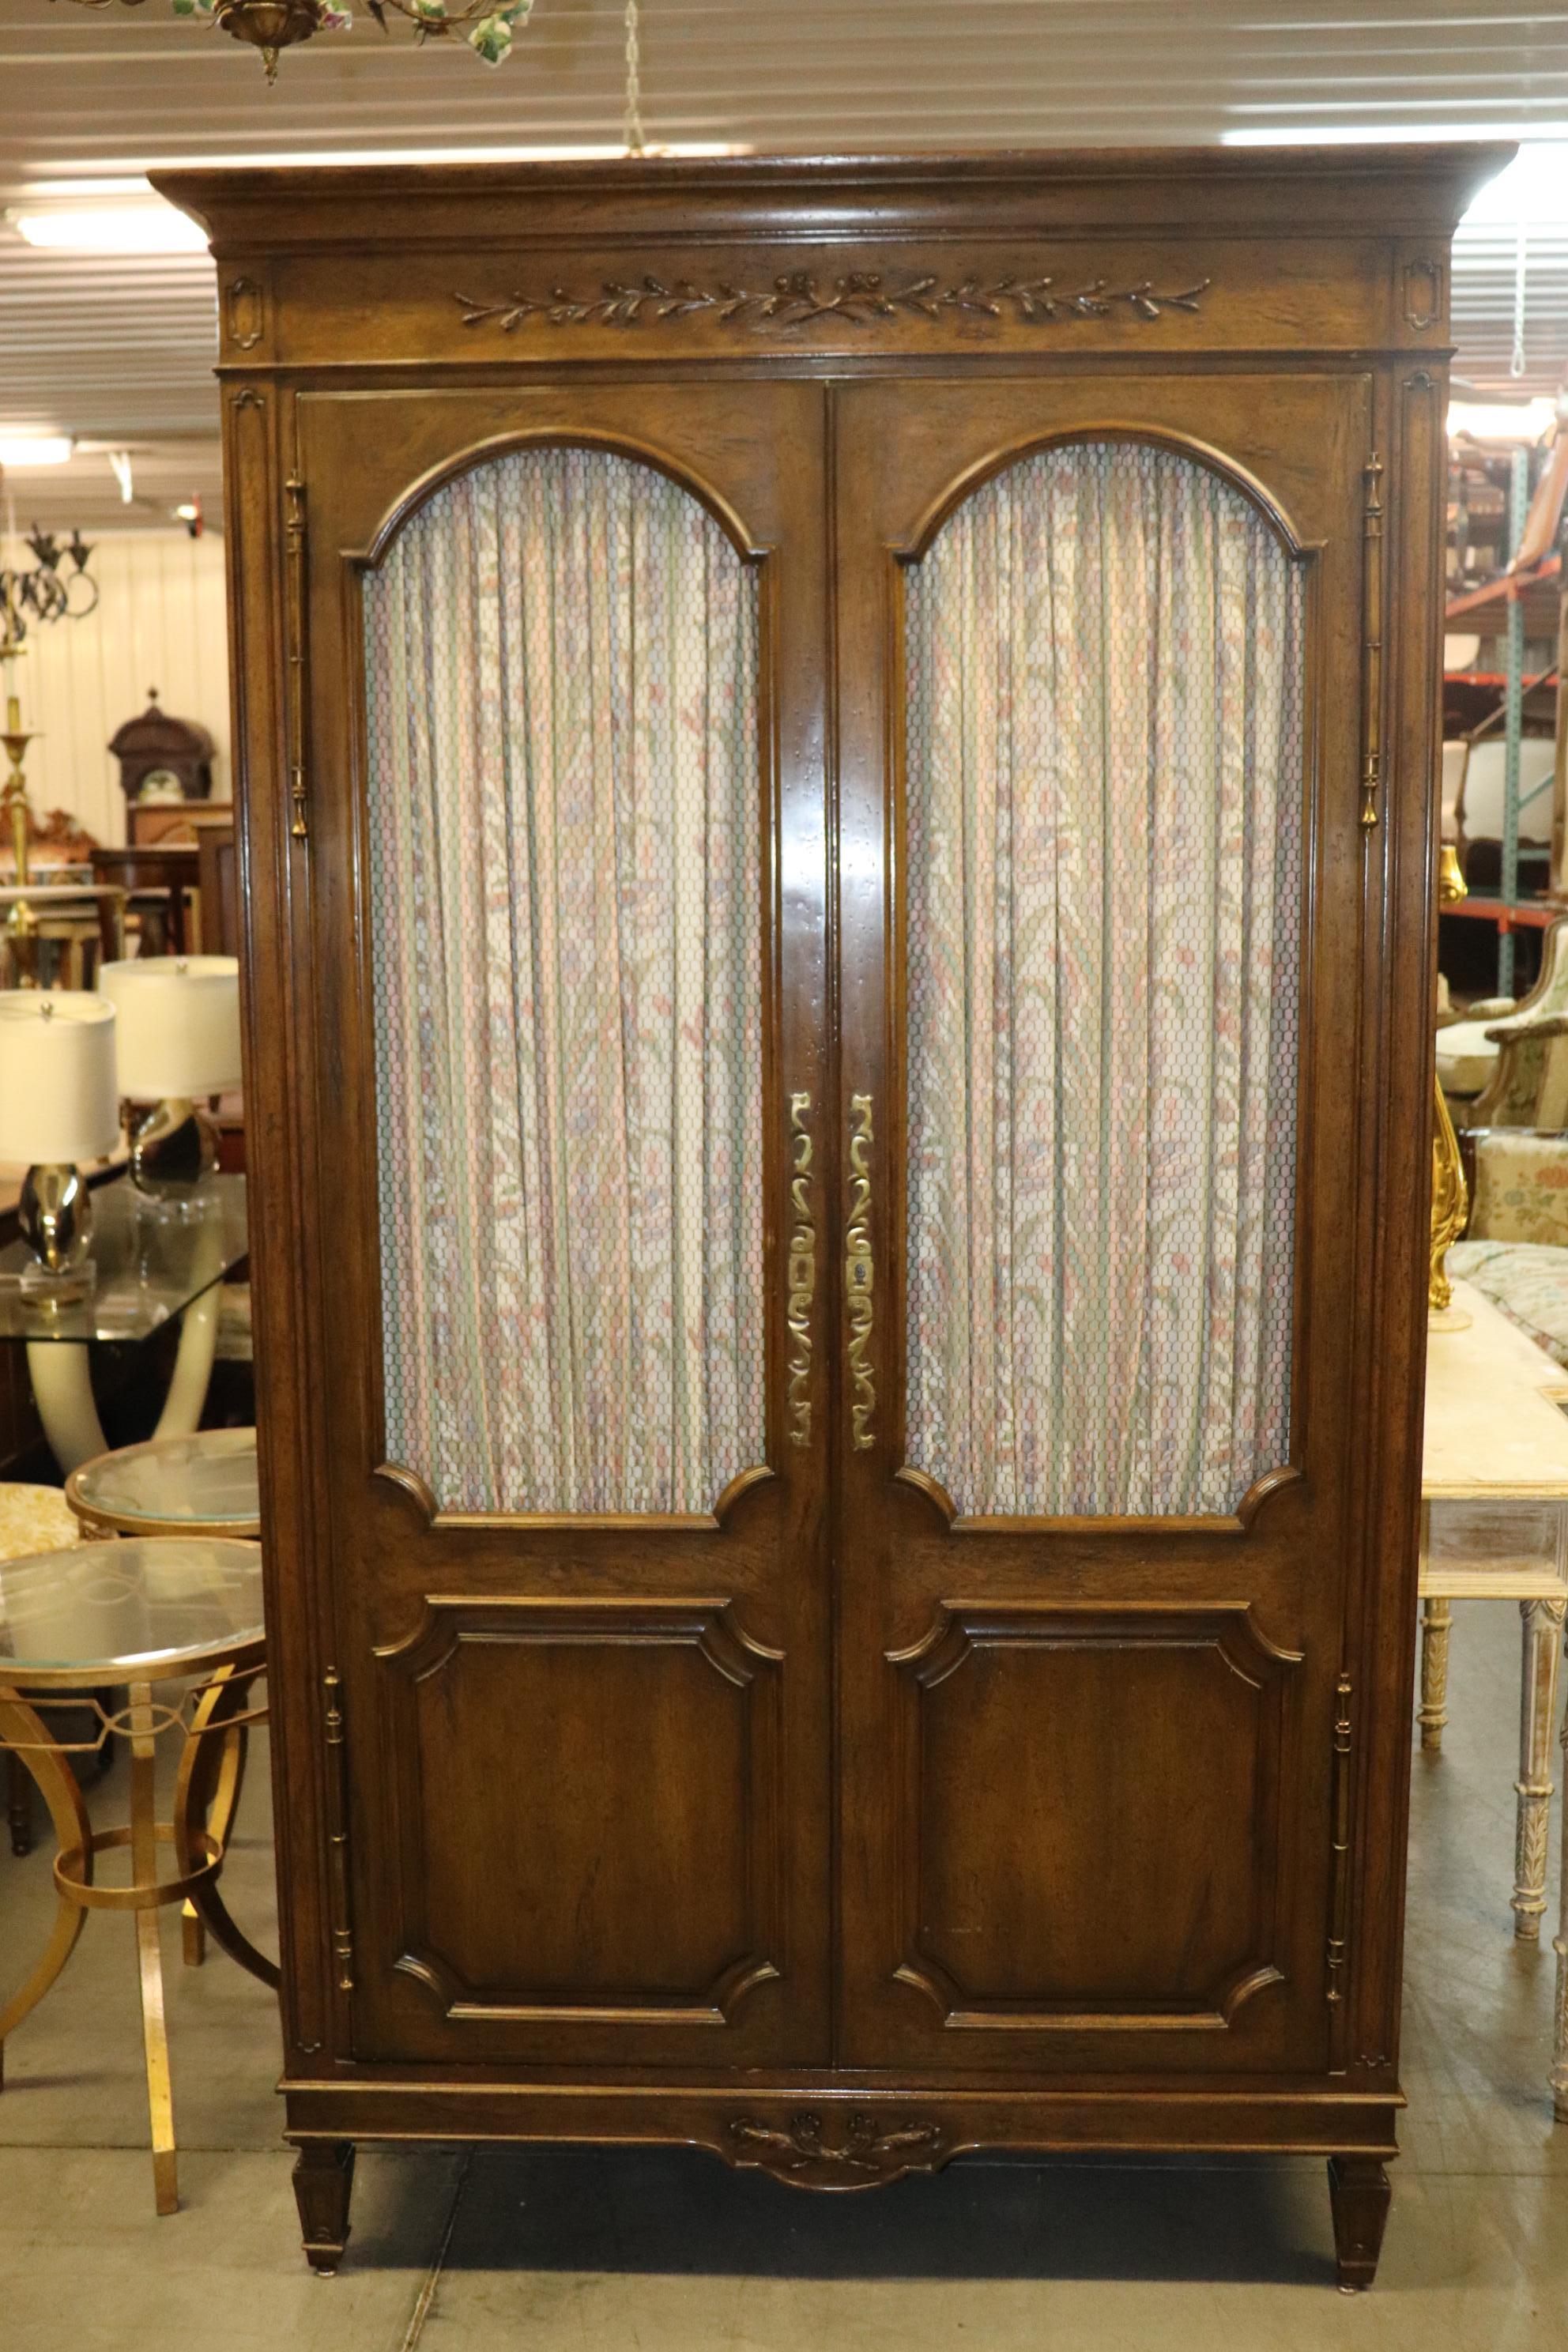 This fantastic Auffray and Co of New York Louis XVI armoire has a wonderful design, wire mesh grillwork in the doors for ventilation and is pure in design and needs no explanation. The armoire is in very good vintage condition and measures 89 tall x